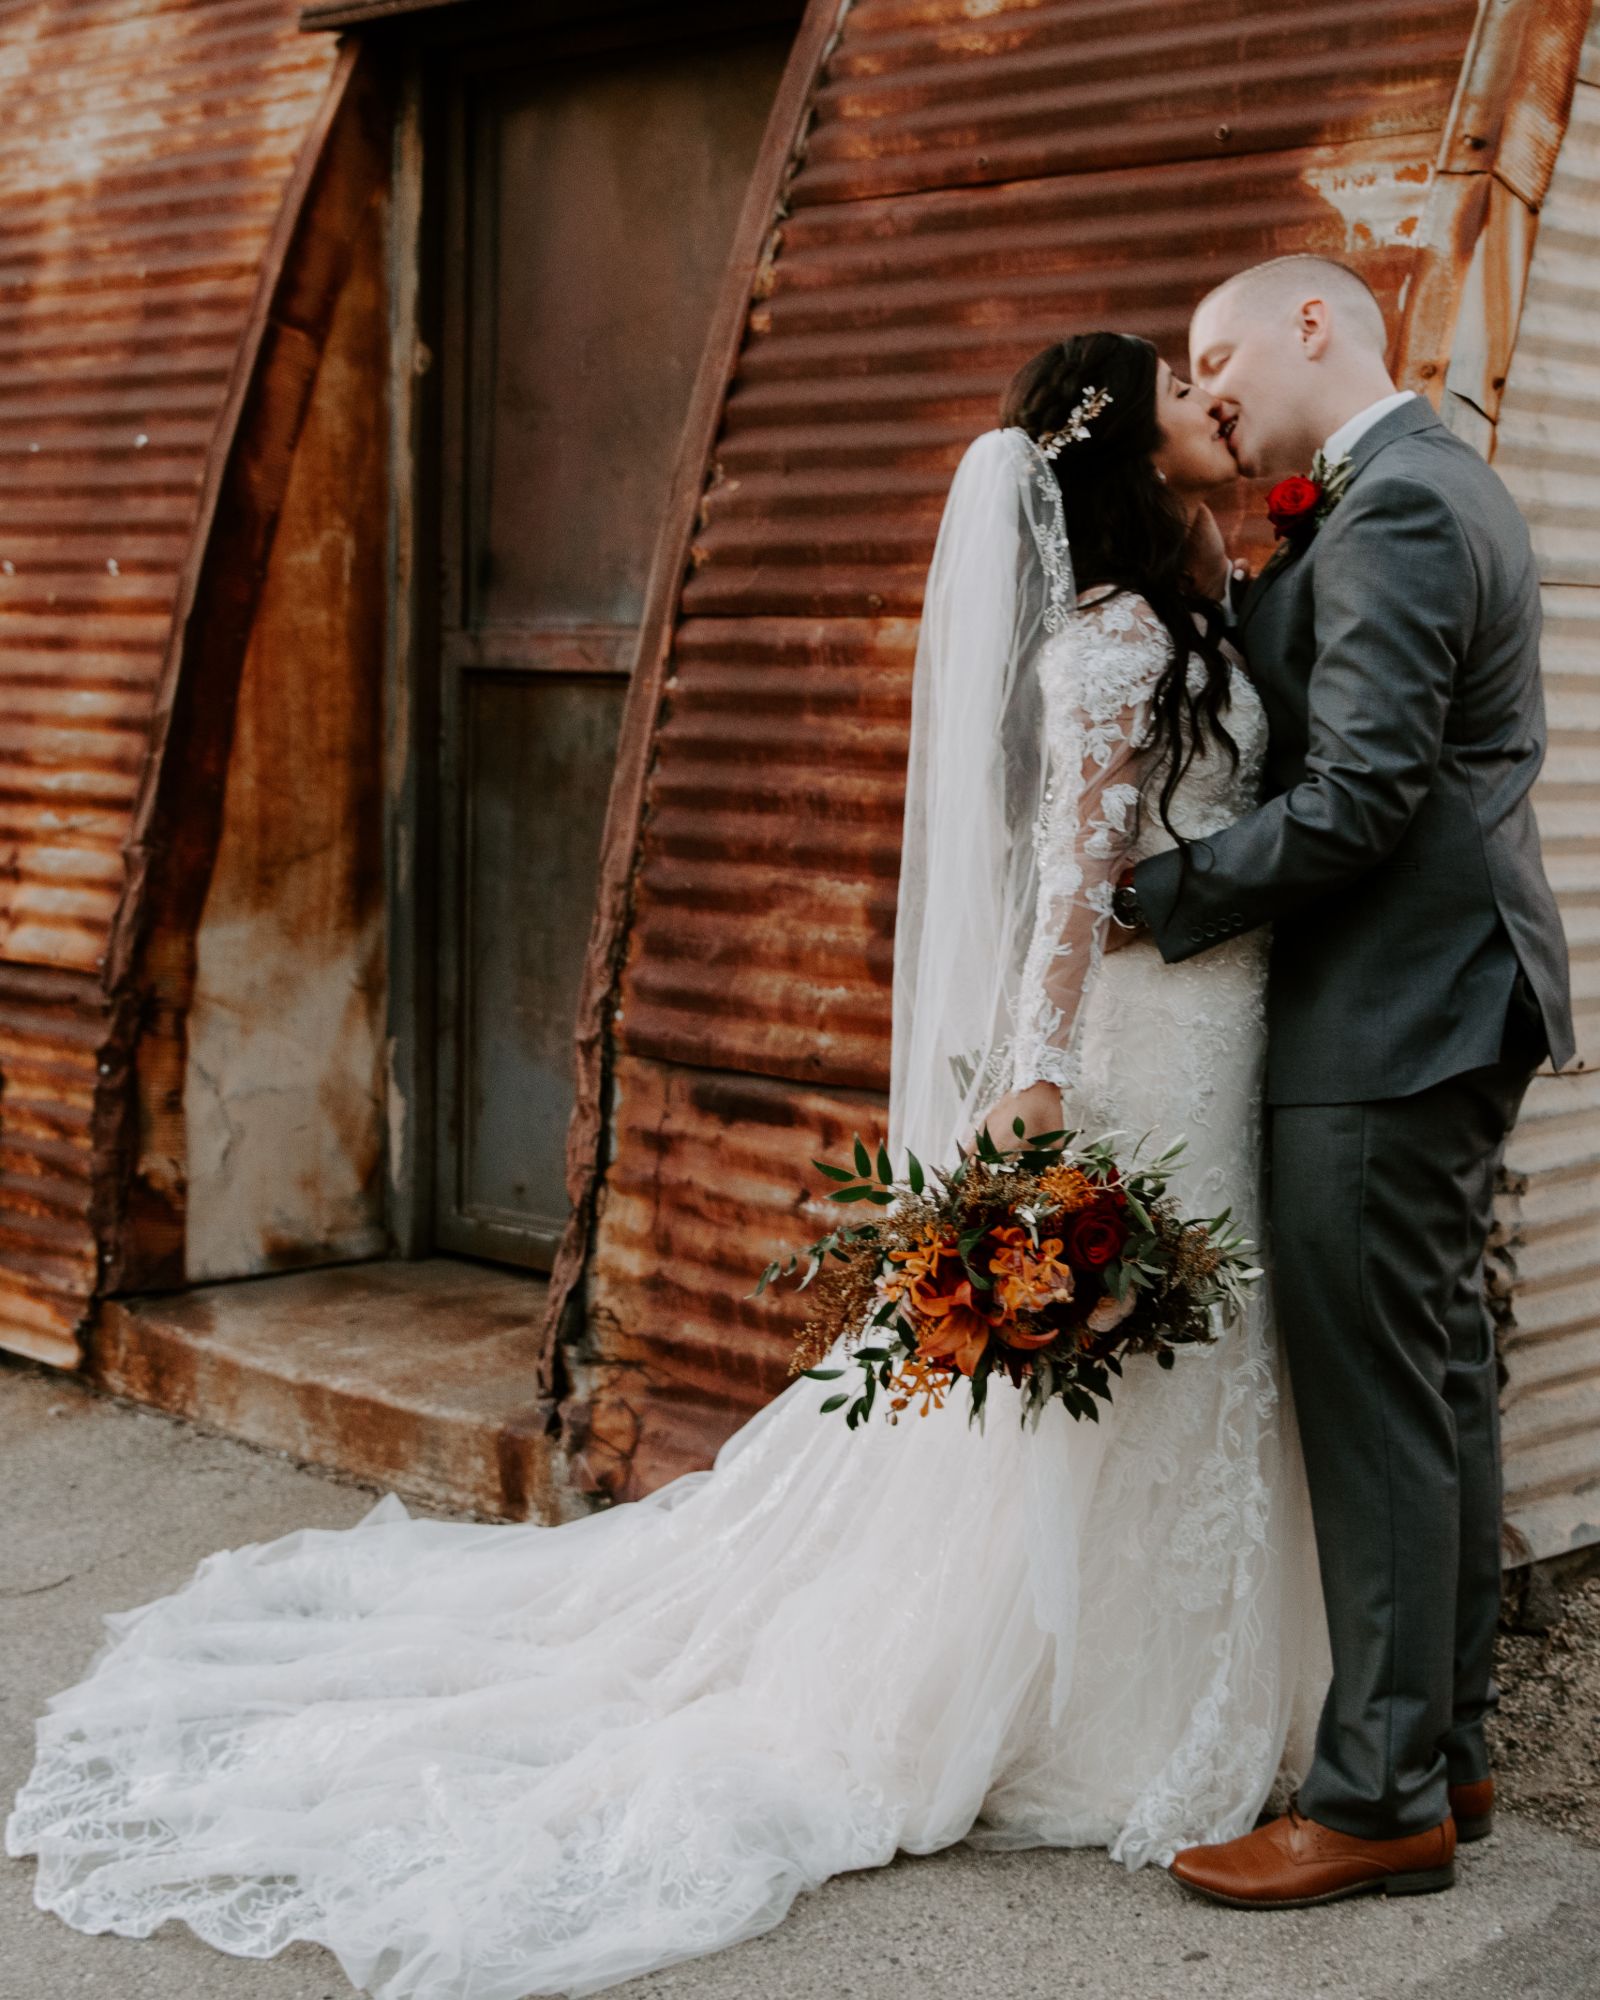 What inspired me to do a boho/rustic wedding was the venue I had my wedding.